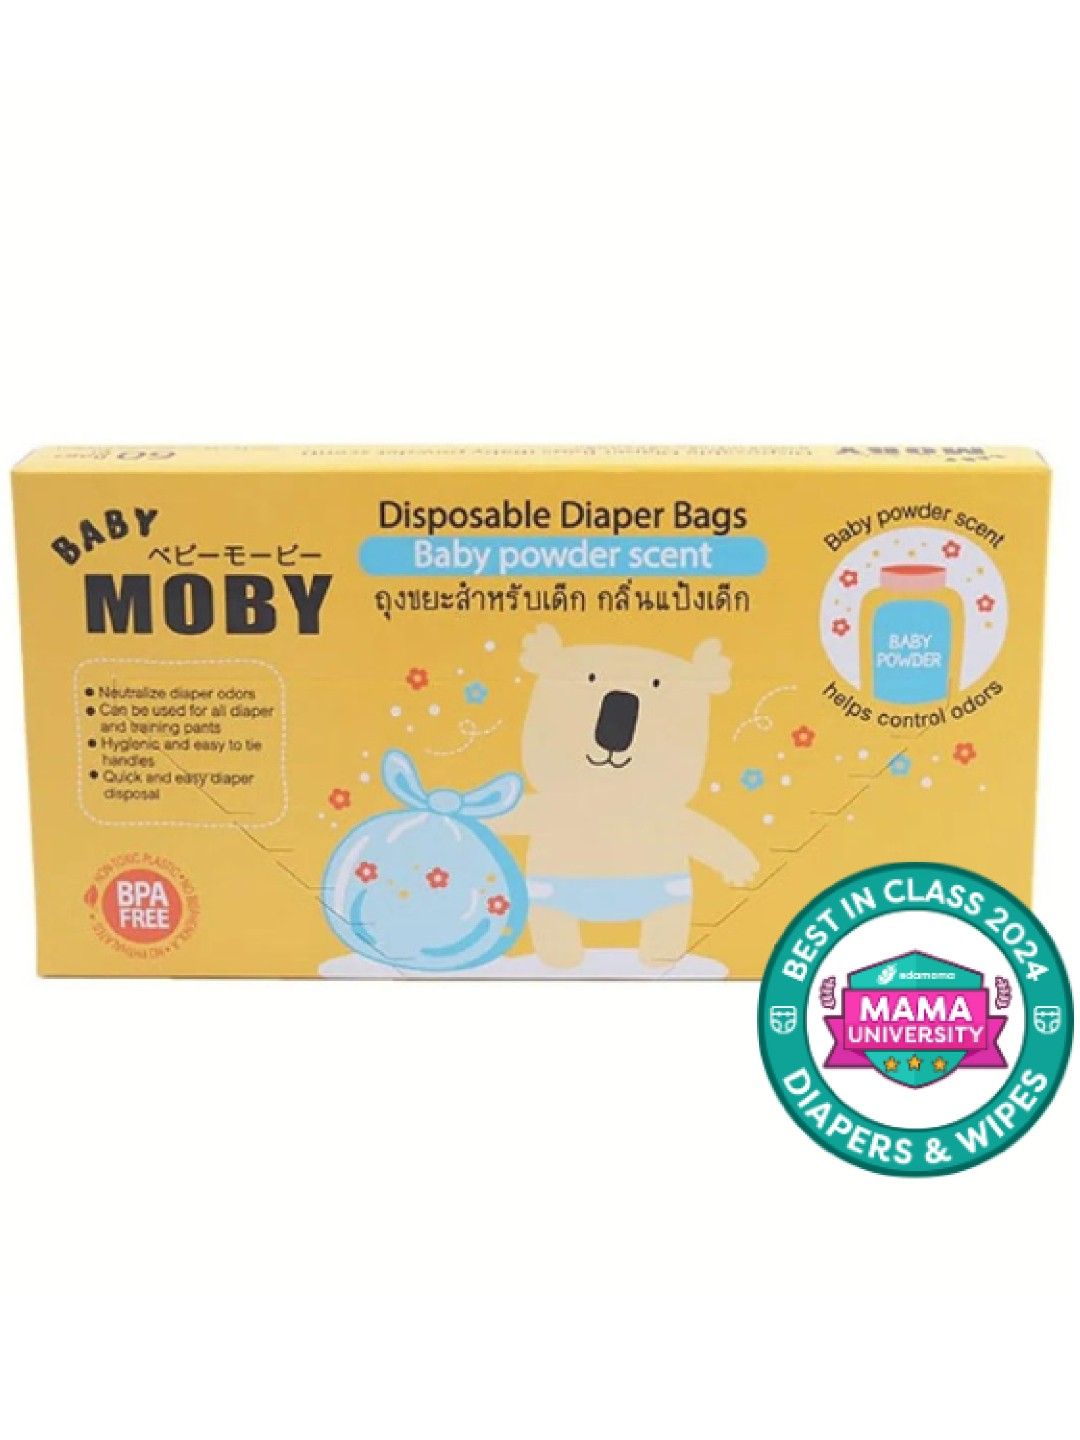 Baby Moby Disposable Diaper Bags (No Color- Image 1)